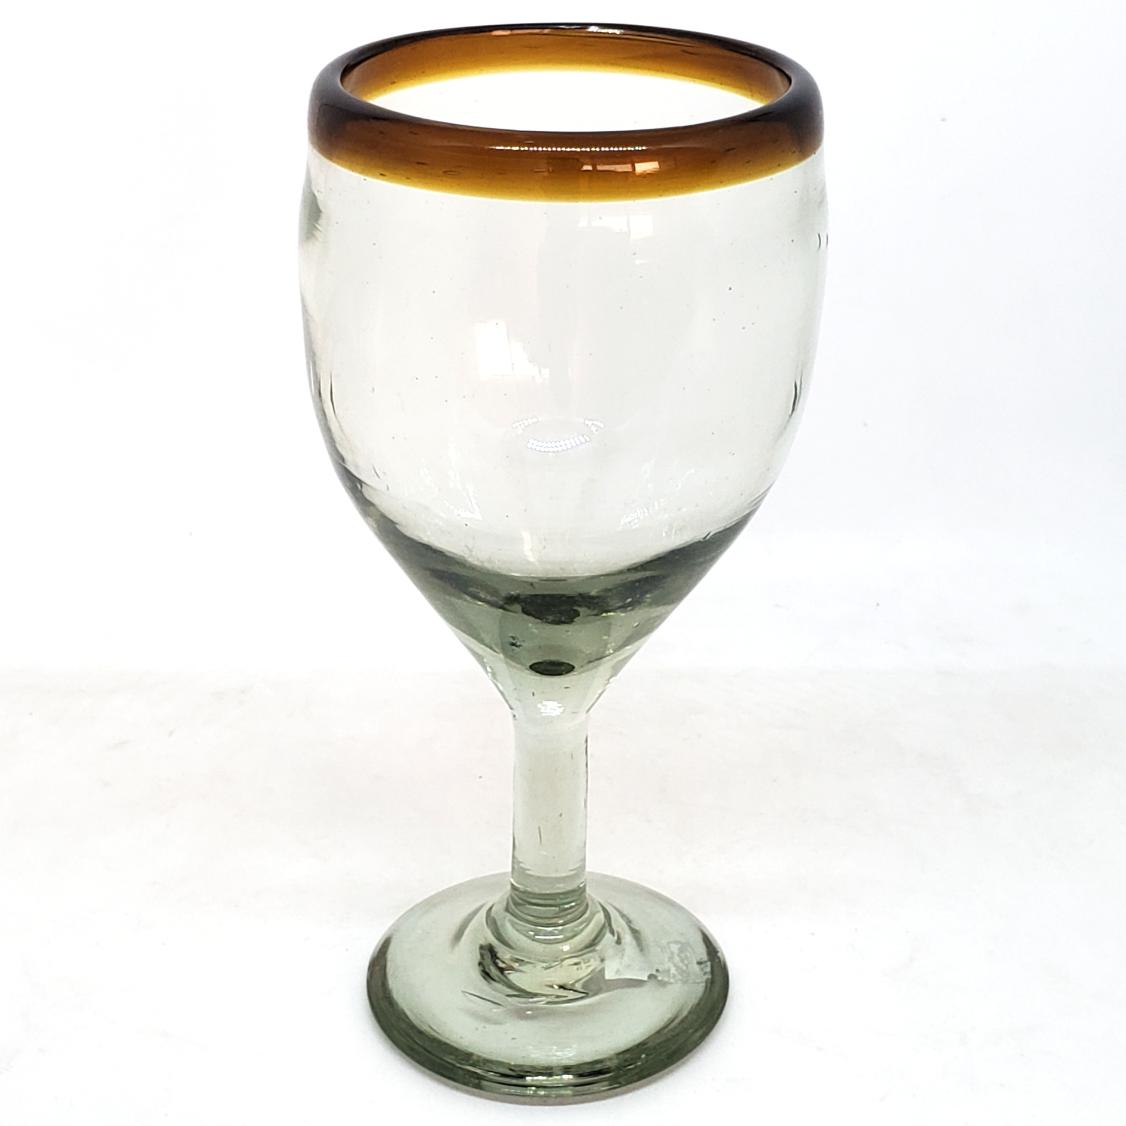 Sale Items / Amber Rim 13 oz Wine Glasses  / Capture the bouquet of fine red wine with these wine glasses bordered with a bright, amber rim.